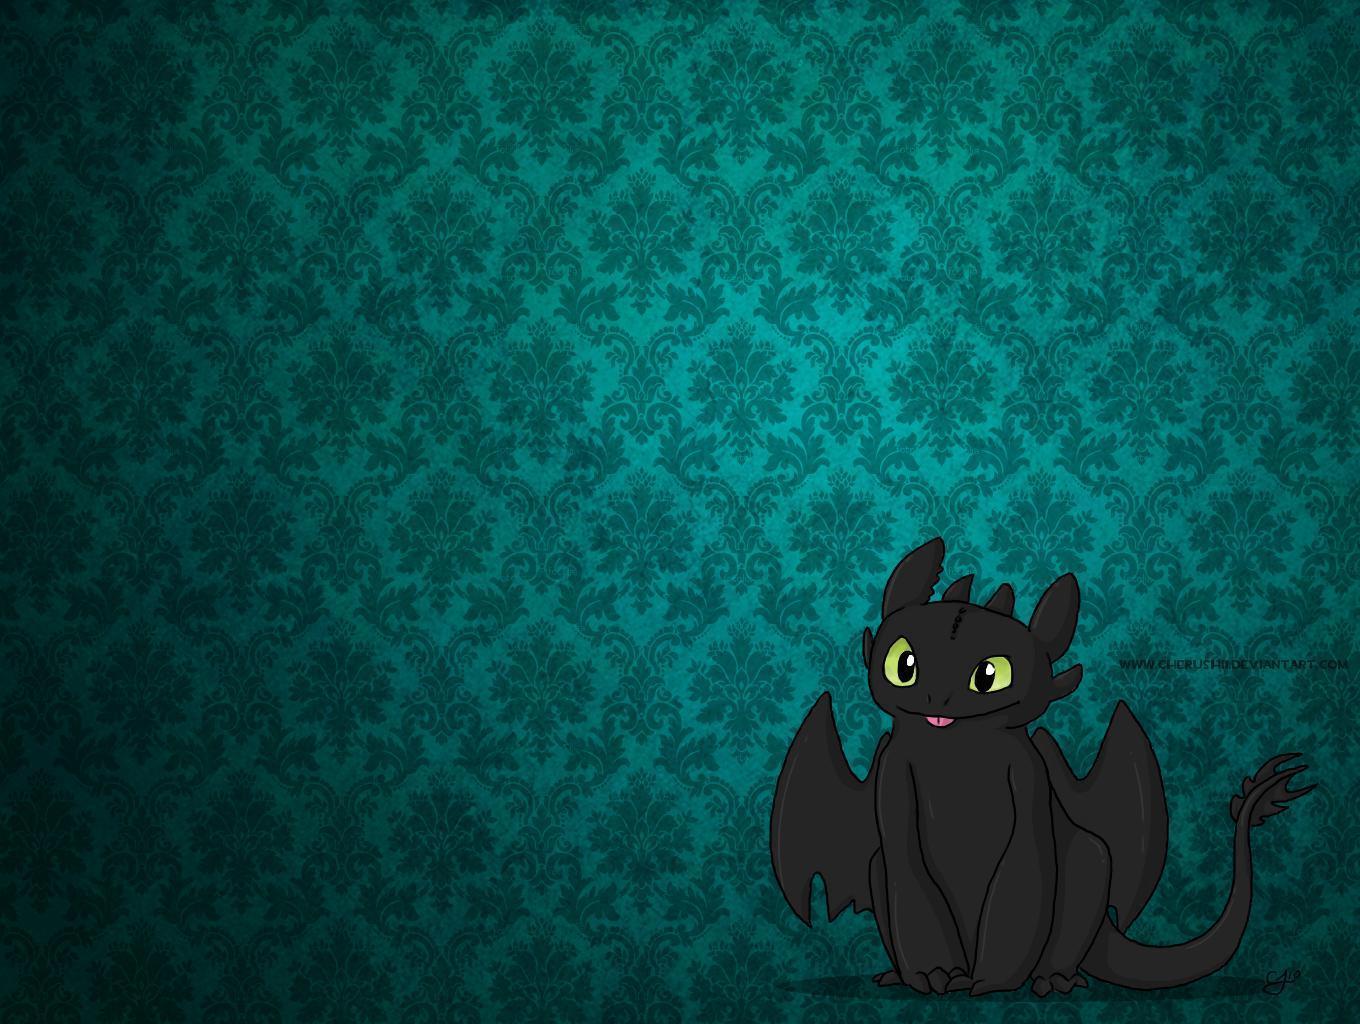 toothless_wallpaper_by_